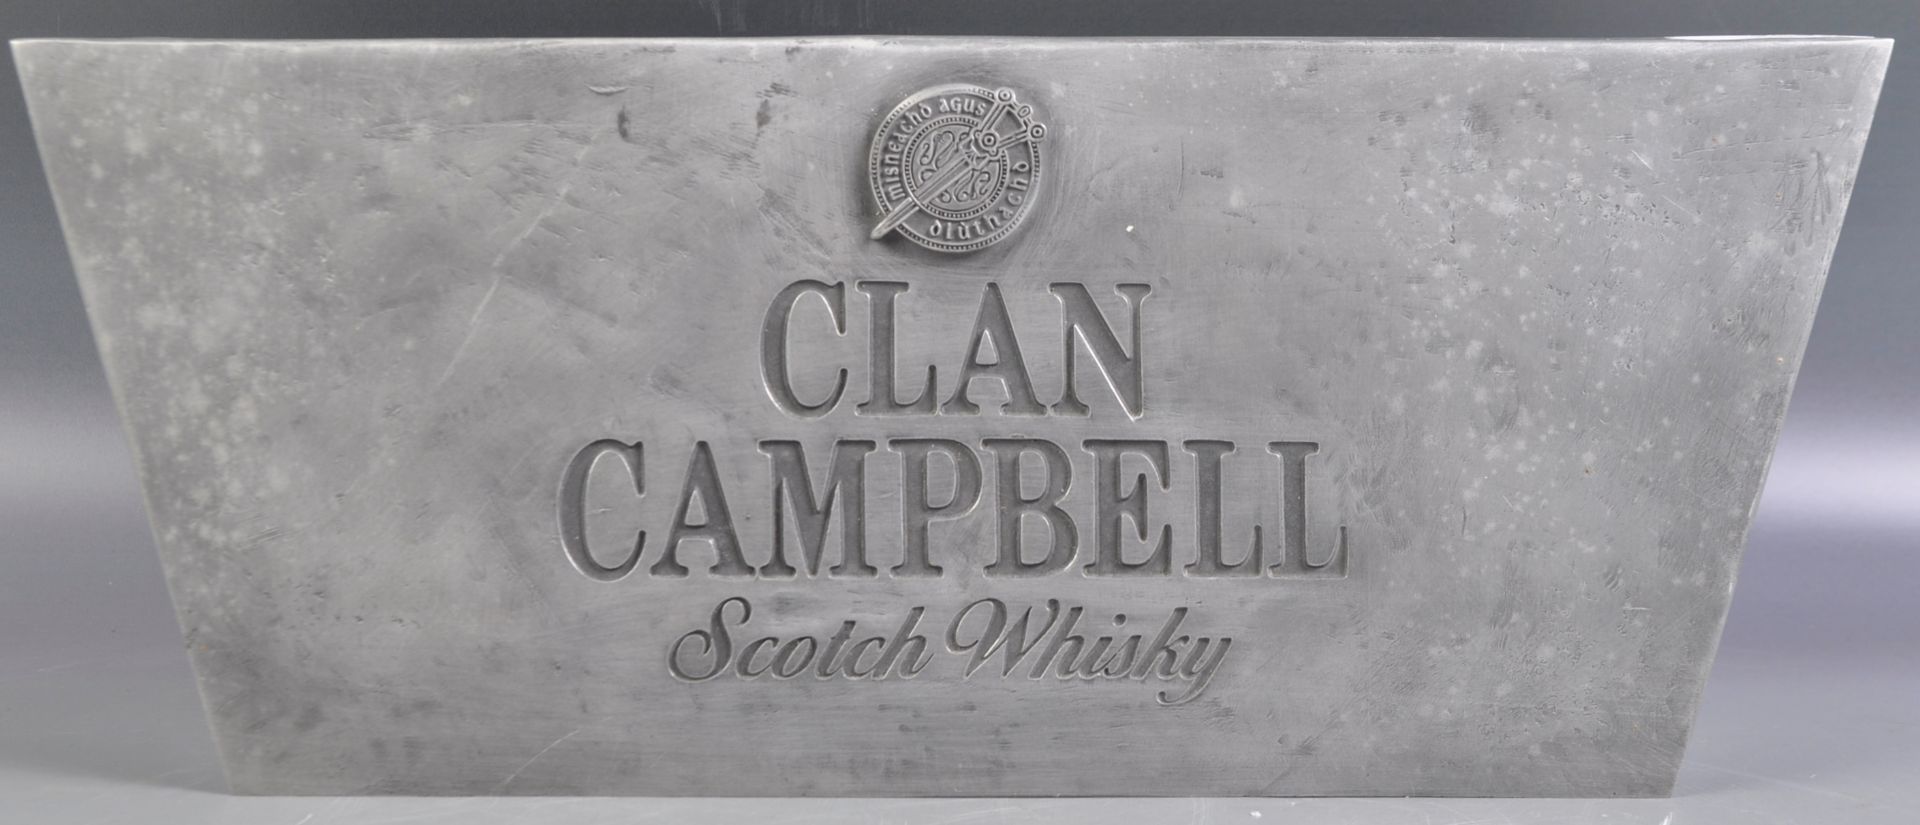 CLAN CAMPBELL CAST RESIN SHOP DISPLAY STAND PLINTH - Image 7 of 7